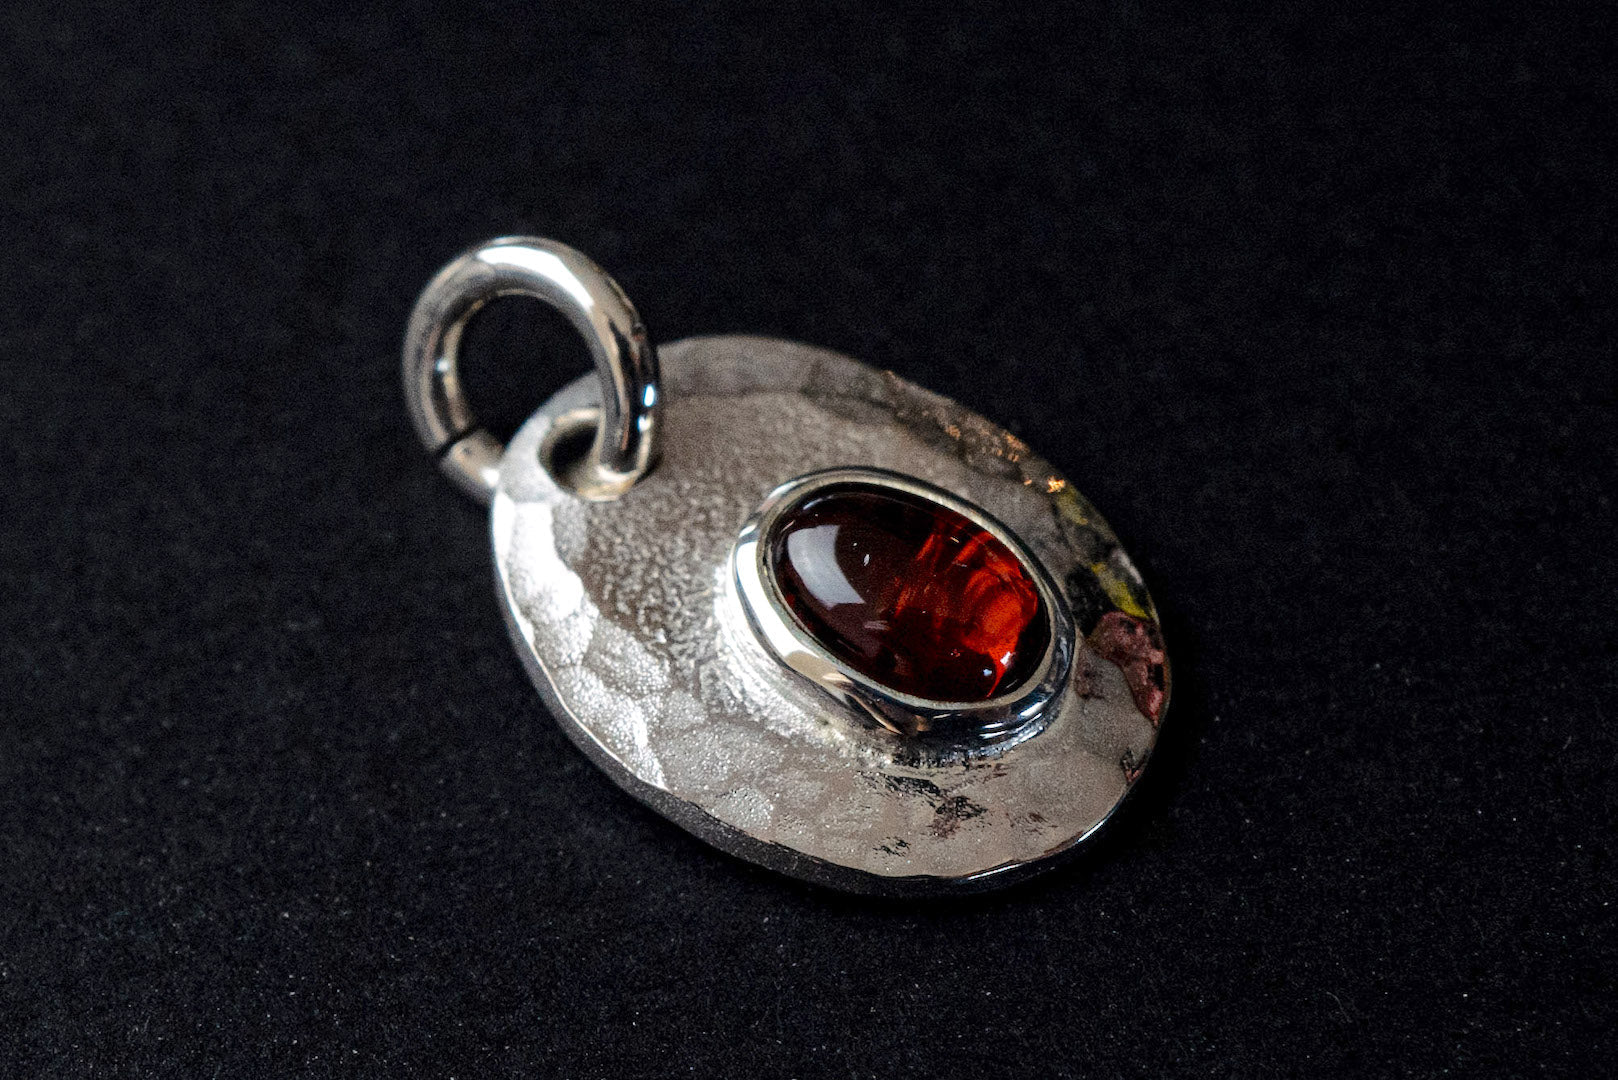 Legend Size Small "Plate" Pendant With Red Garnet (P-1-GN)